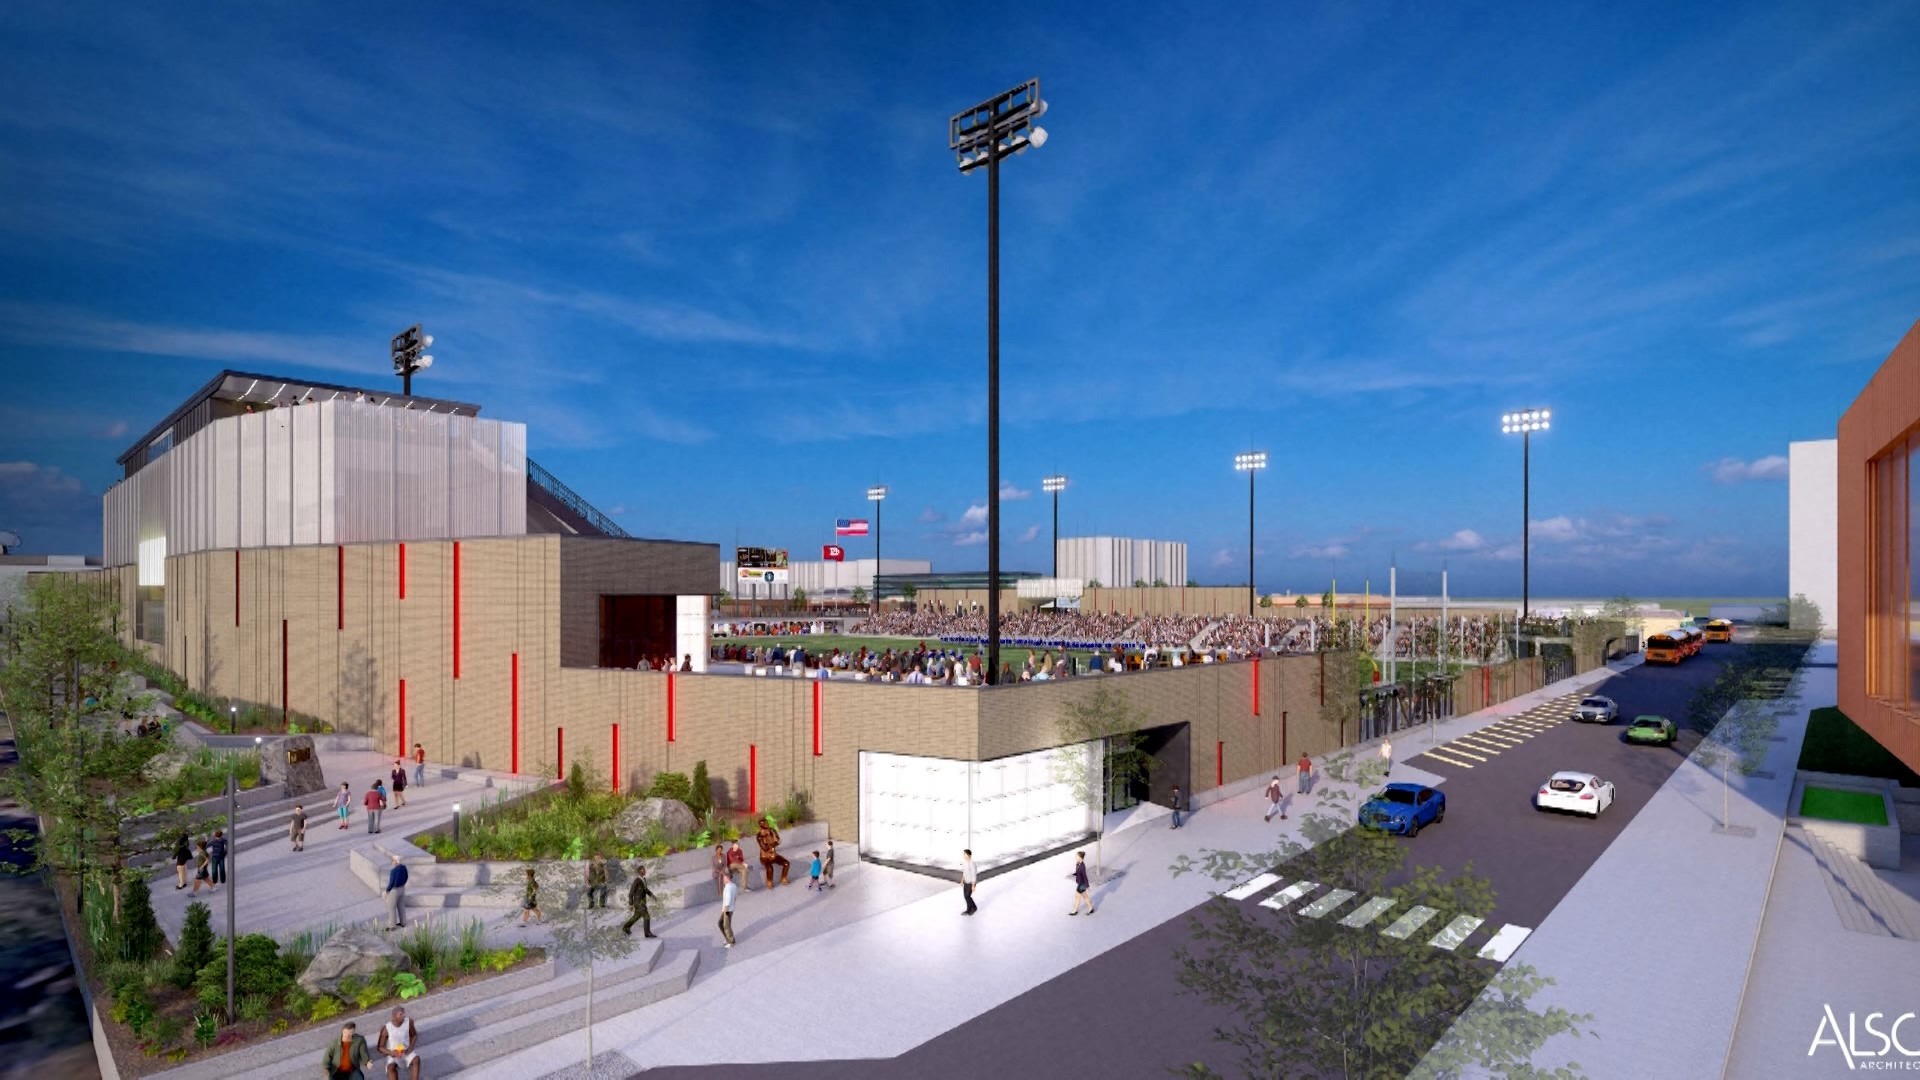 Downtown Spokane Stadium Update on construction and plans